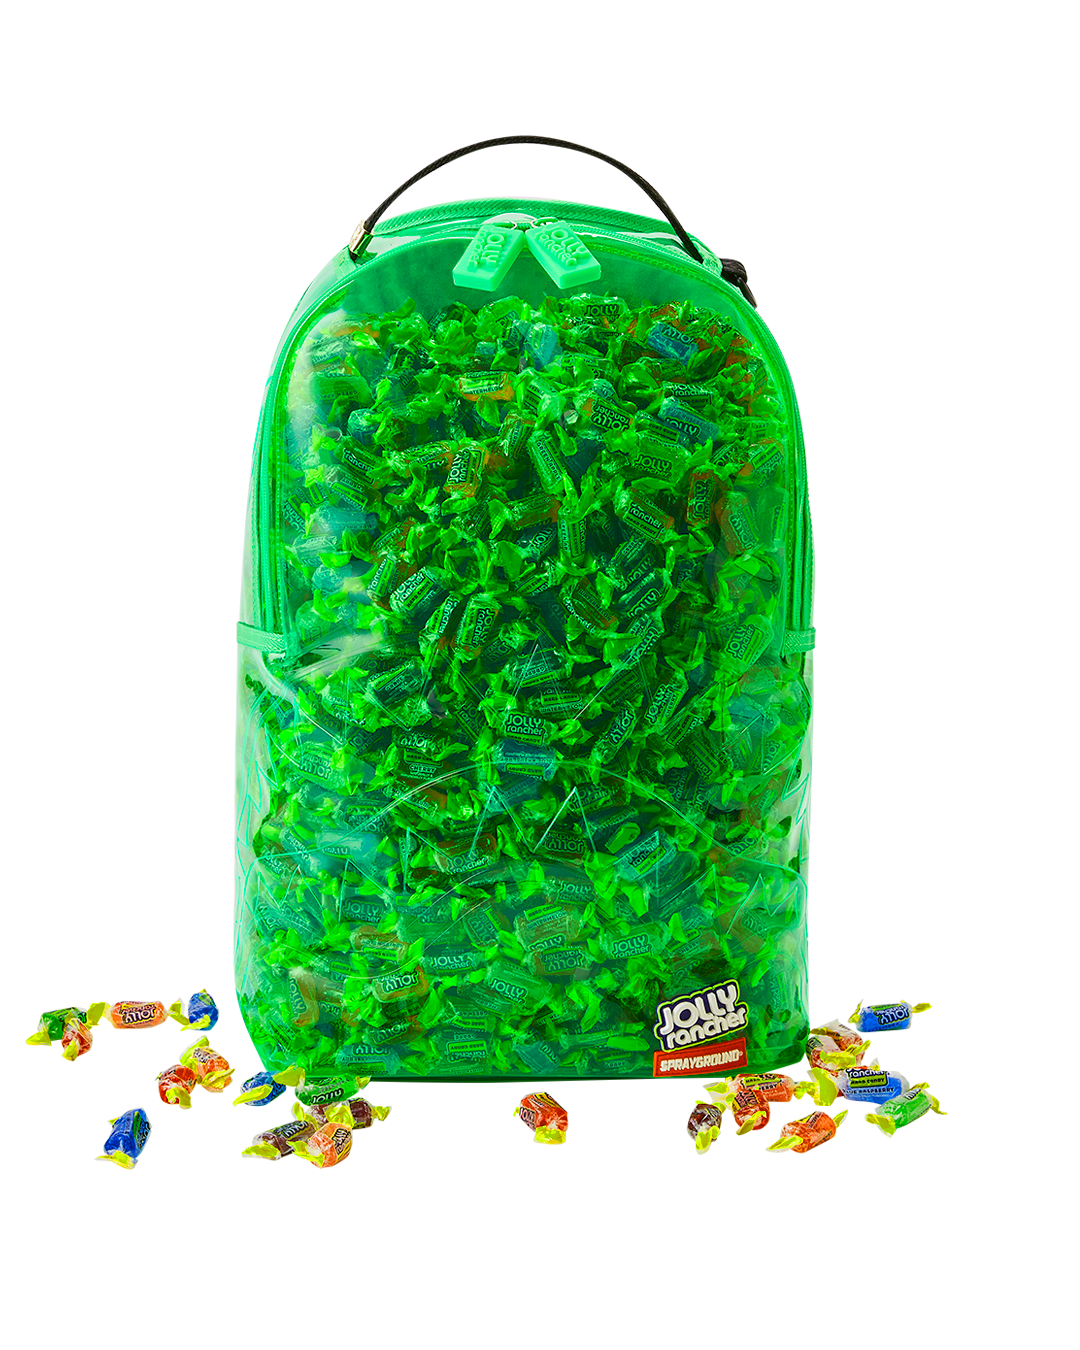 Sprayground Partners With the Absurdly Bold Candy Brand JOLLY